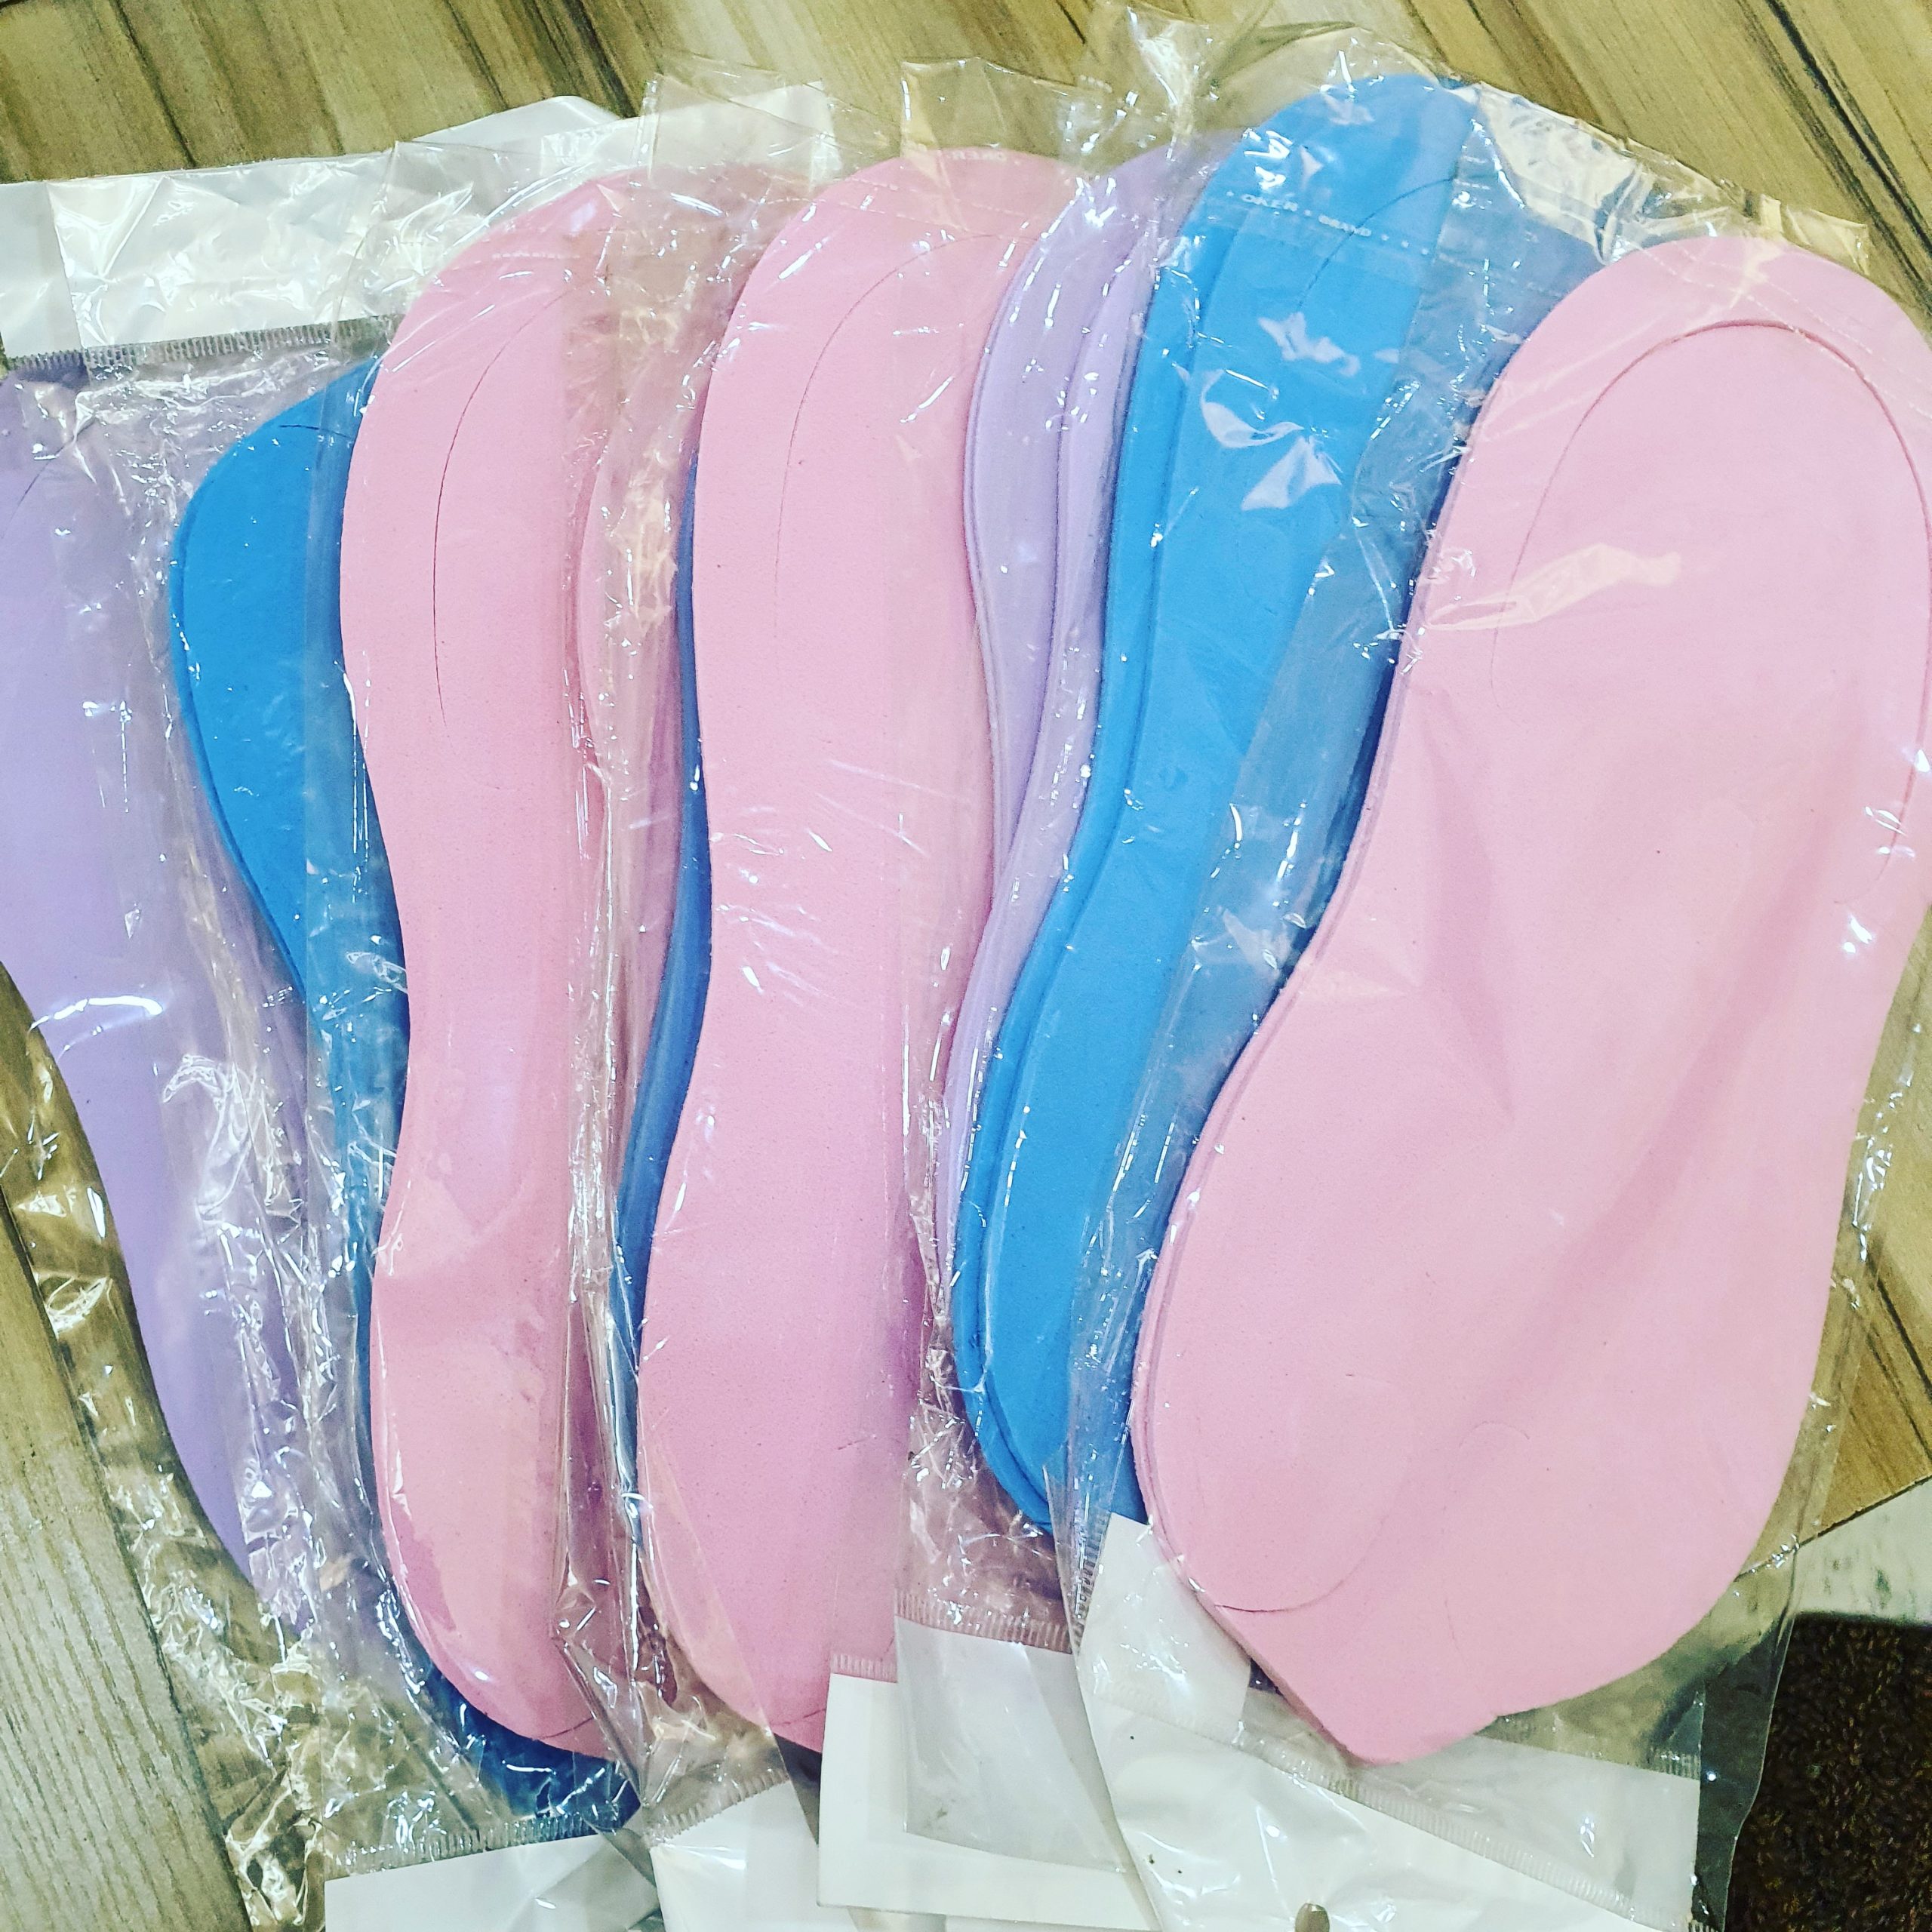 Pedicure slippers